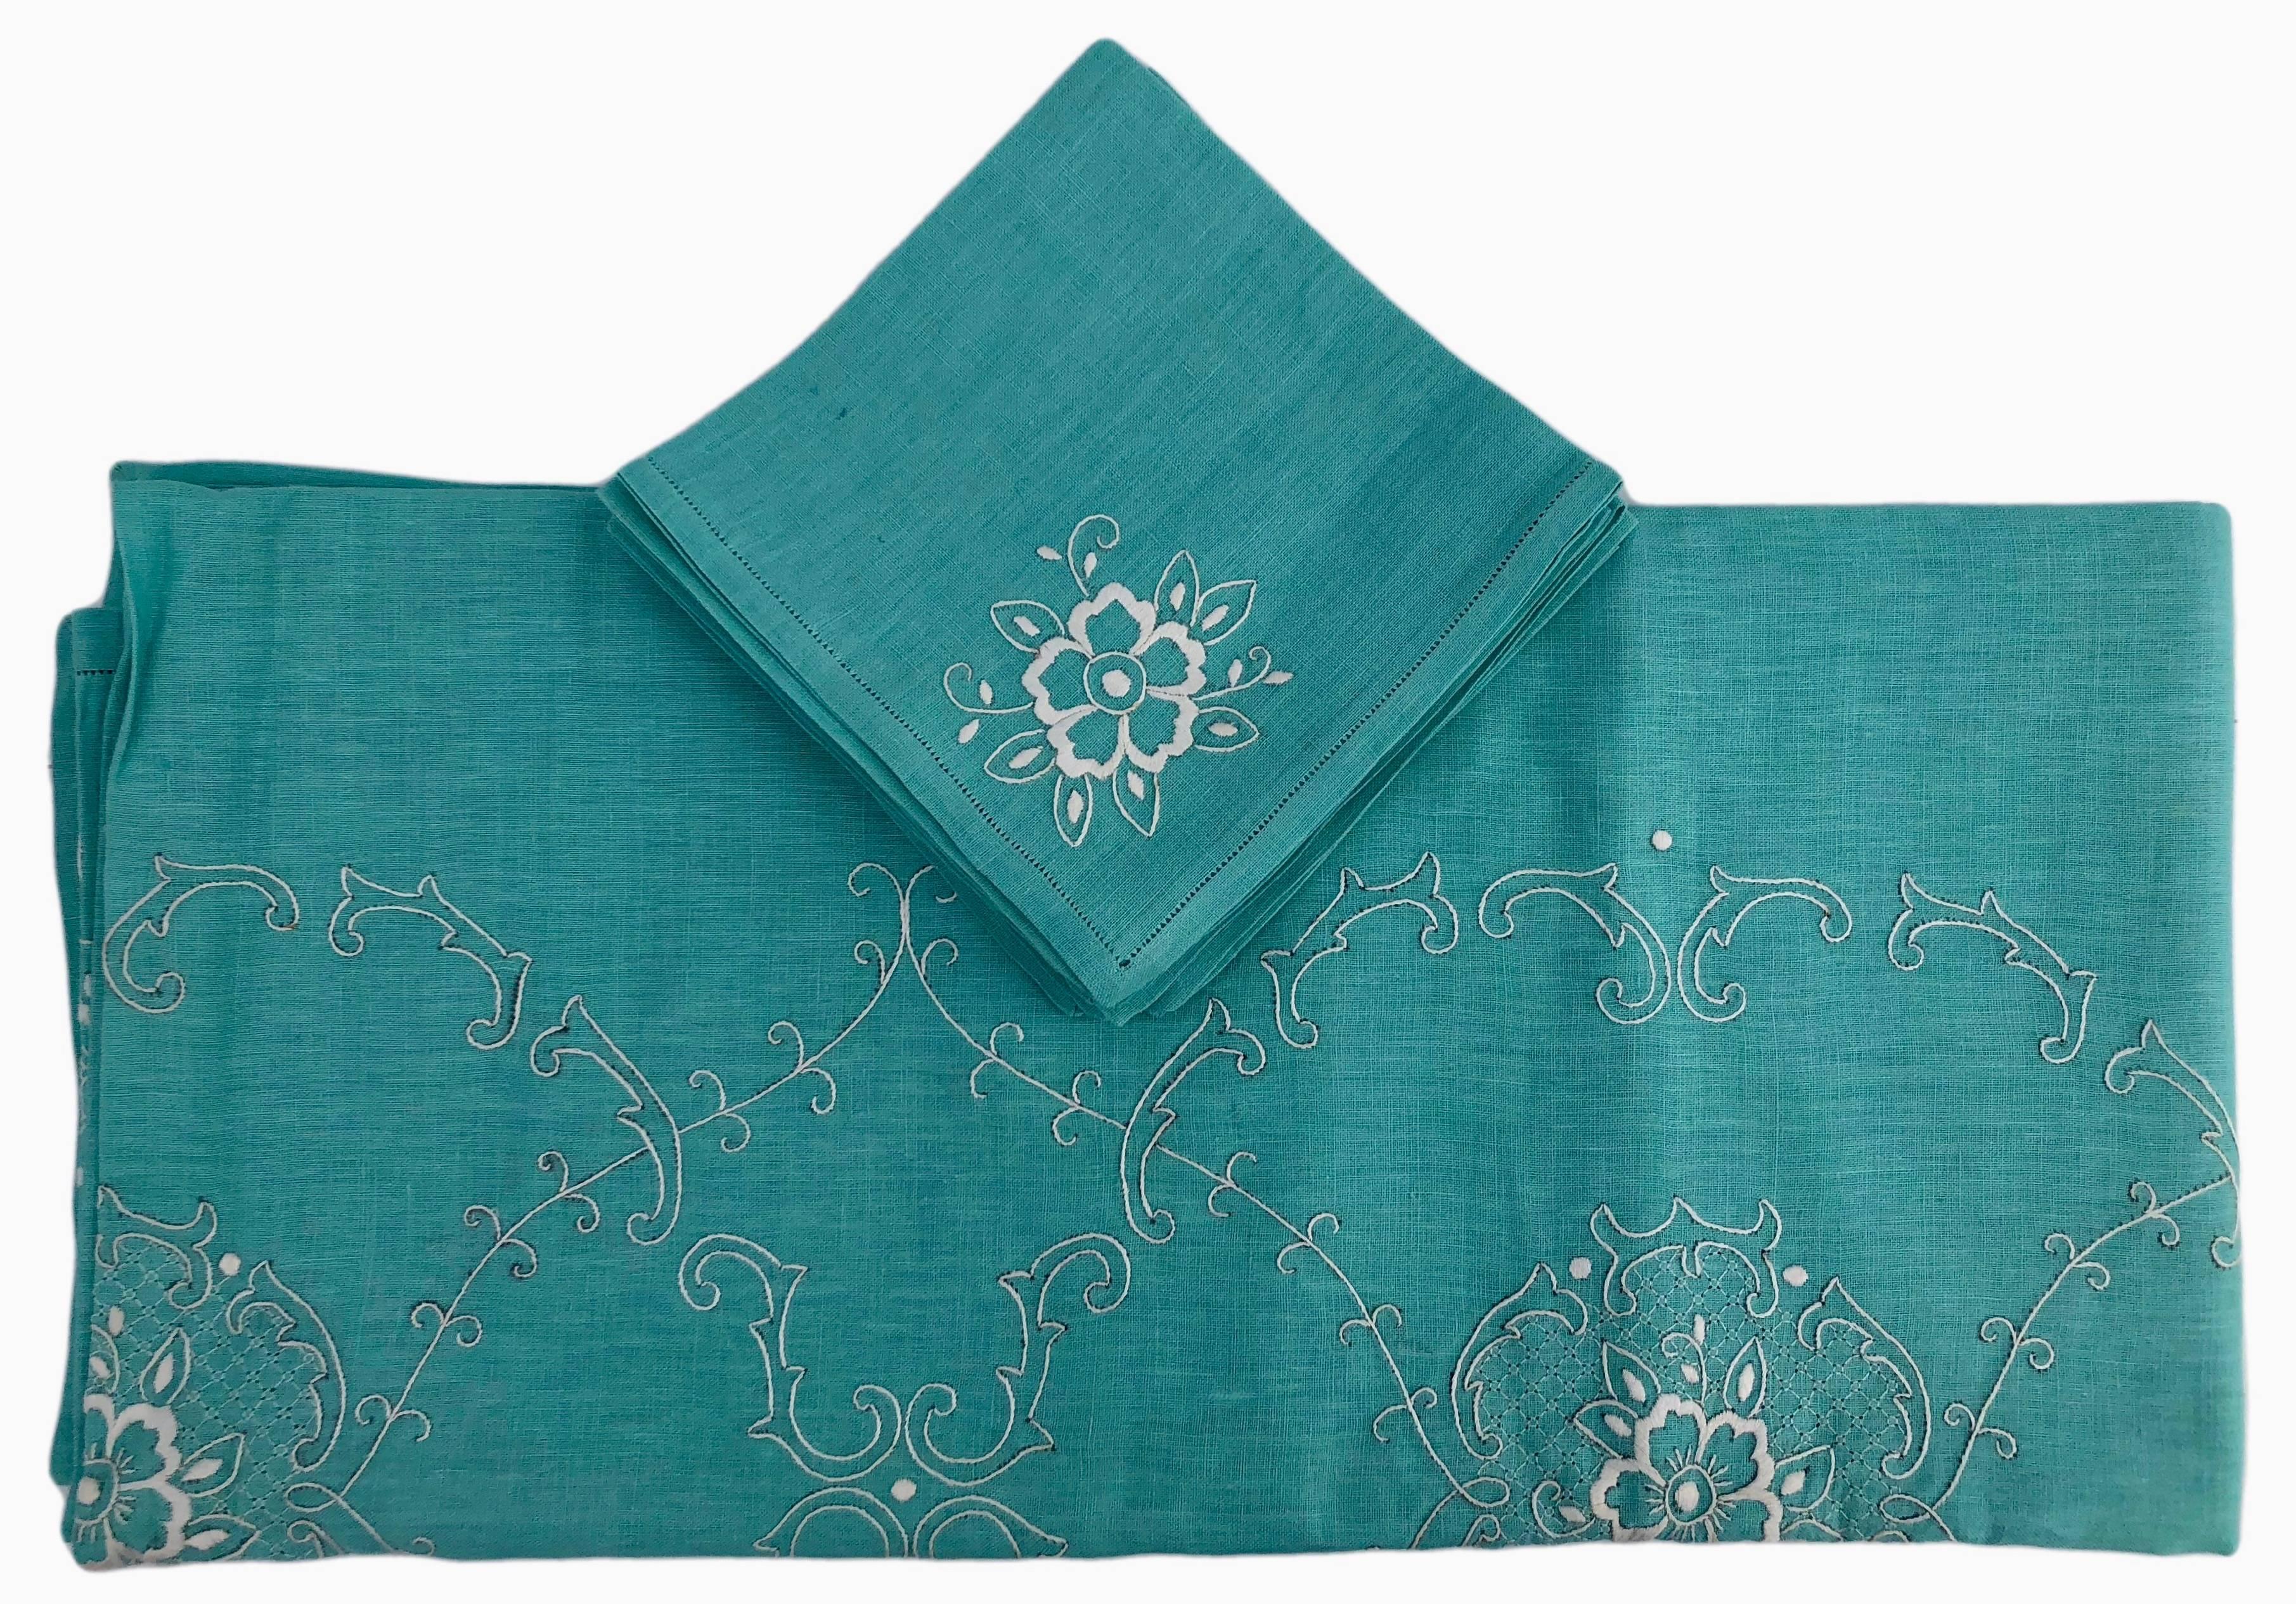 This is a lovely French cotton turquoise tablecloth with white embroidered flowers and a scroll design throughout. There are also eight matching napkins with the same design. The embroidered flowers have a thicker white embroidery design while the